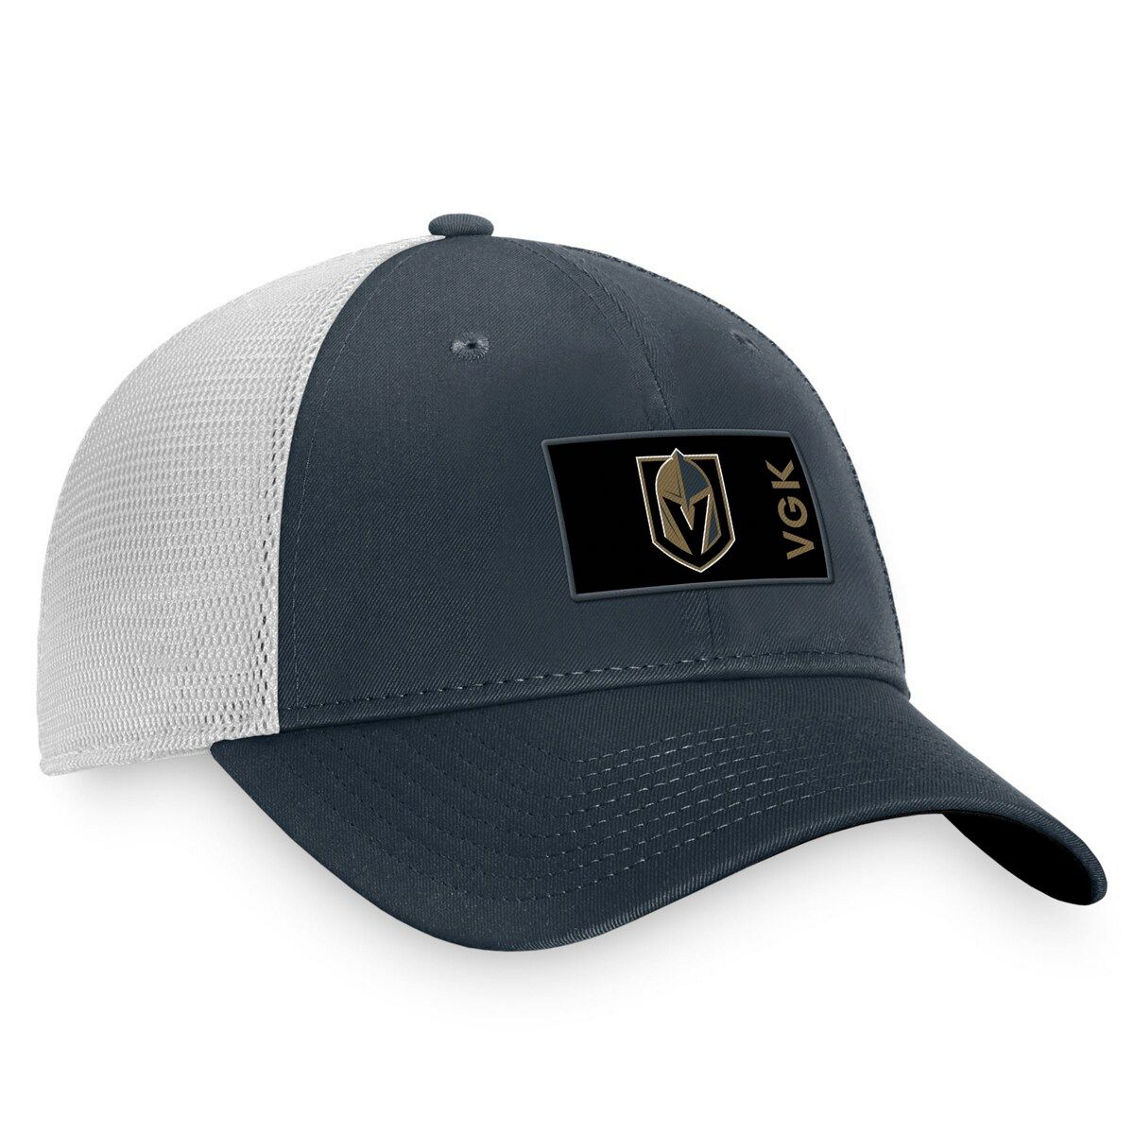 Fanatics Branded Men's Charcoal/White Vegas Golden Knights Authentic Pro Rink Trucker Snapback Hat - Image 4 of 4